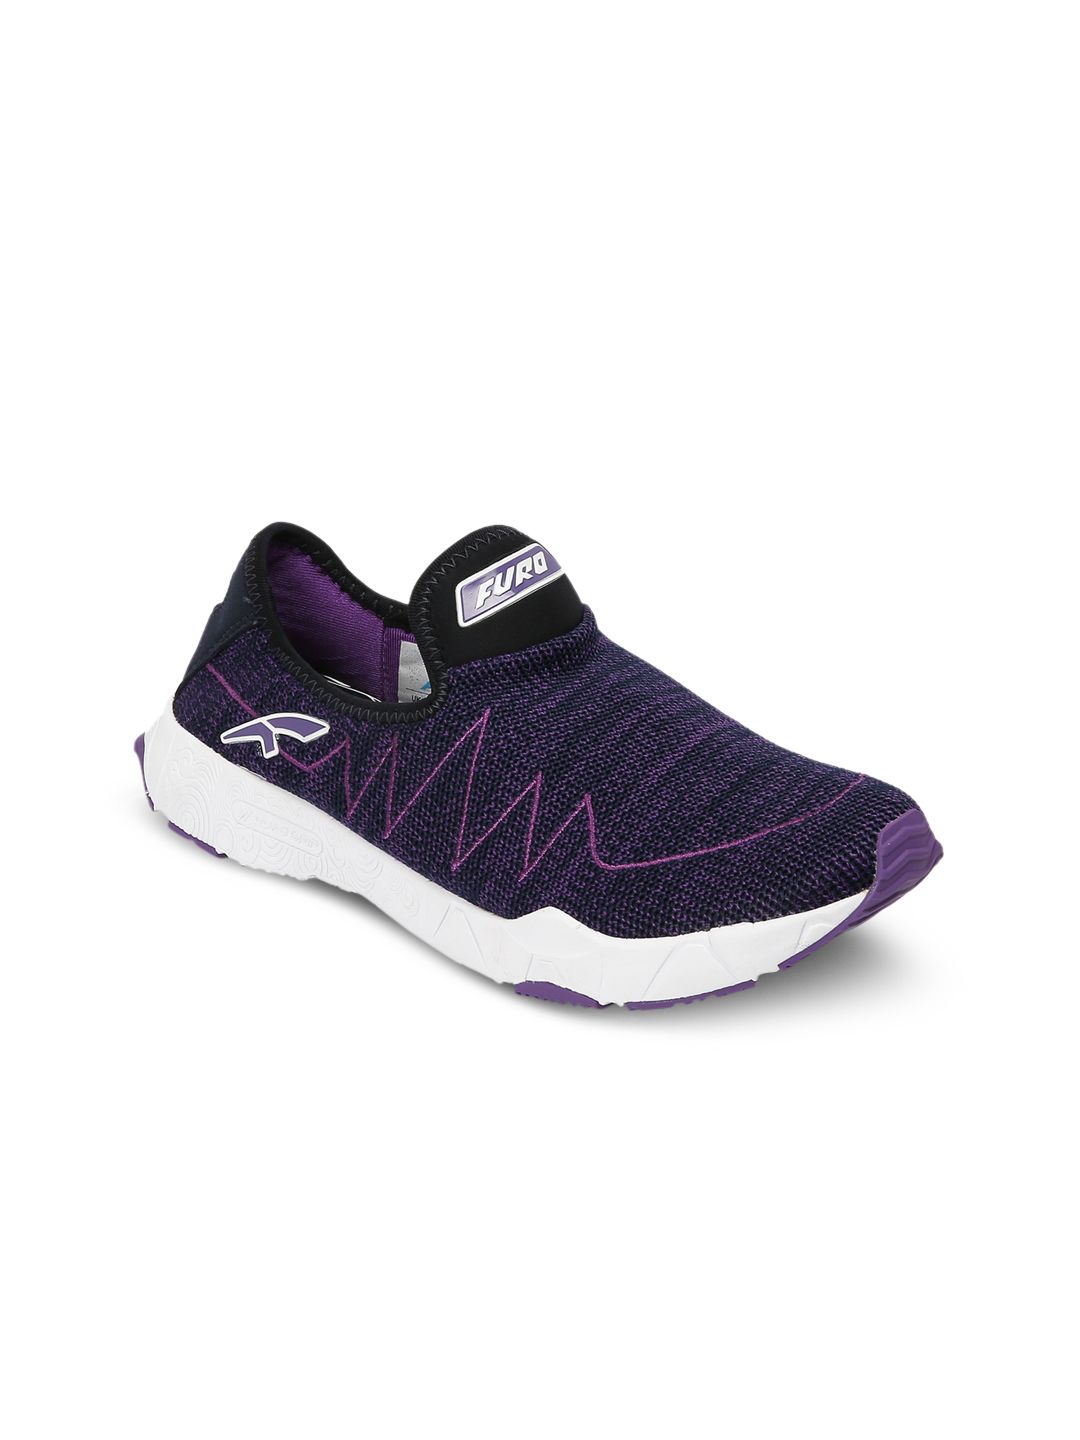 FURO by Red Chief Women Purple Mesh Mid-Top Running Shoes Price in India